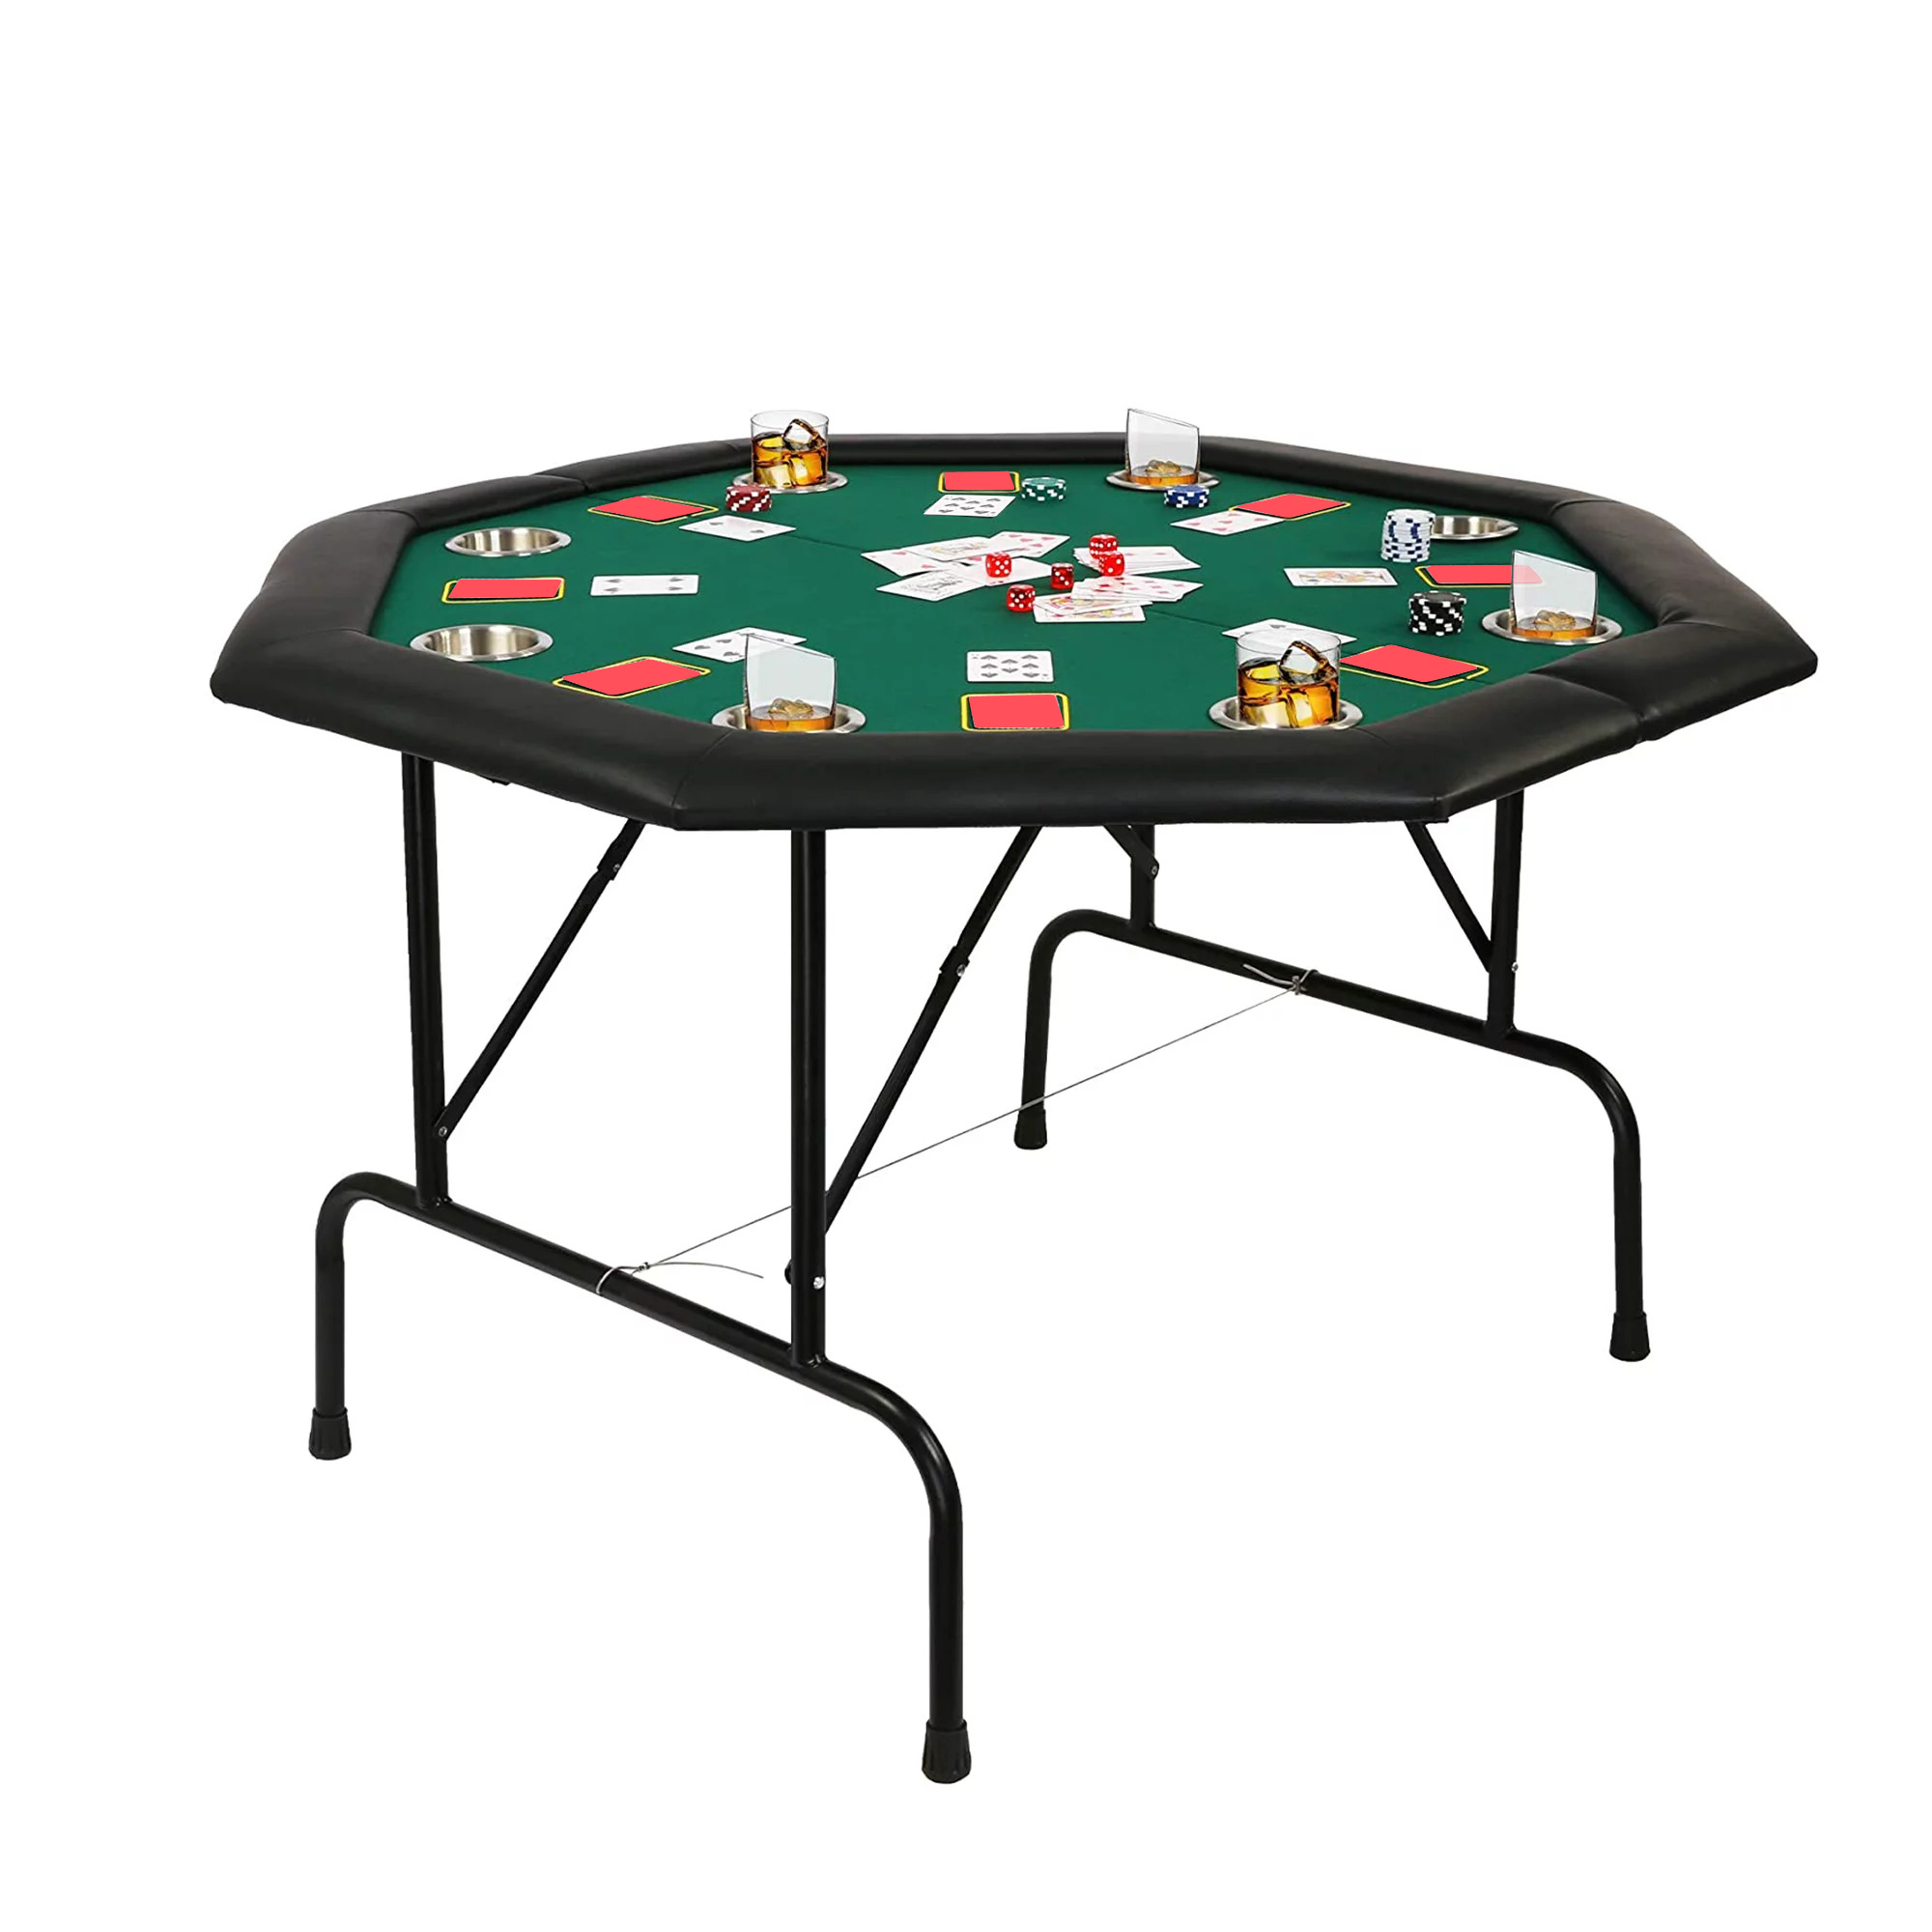 Karmas Product Folding Casino Poker Table with Cup & Foldable Leg for 8 Player, Octagon Texas Hold'em Poker Mat for Blackjack, Club, Family Games - image 1 of 8